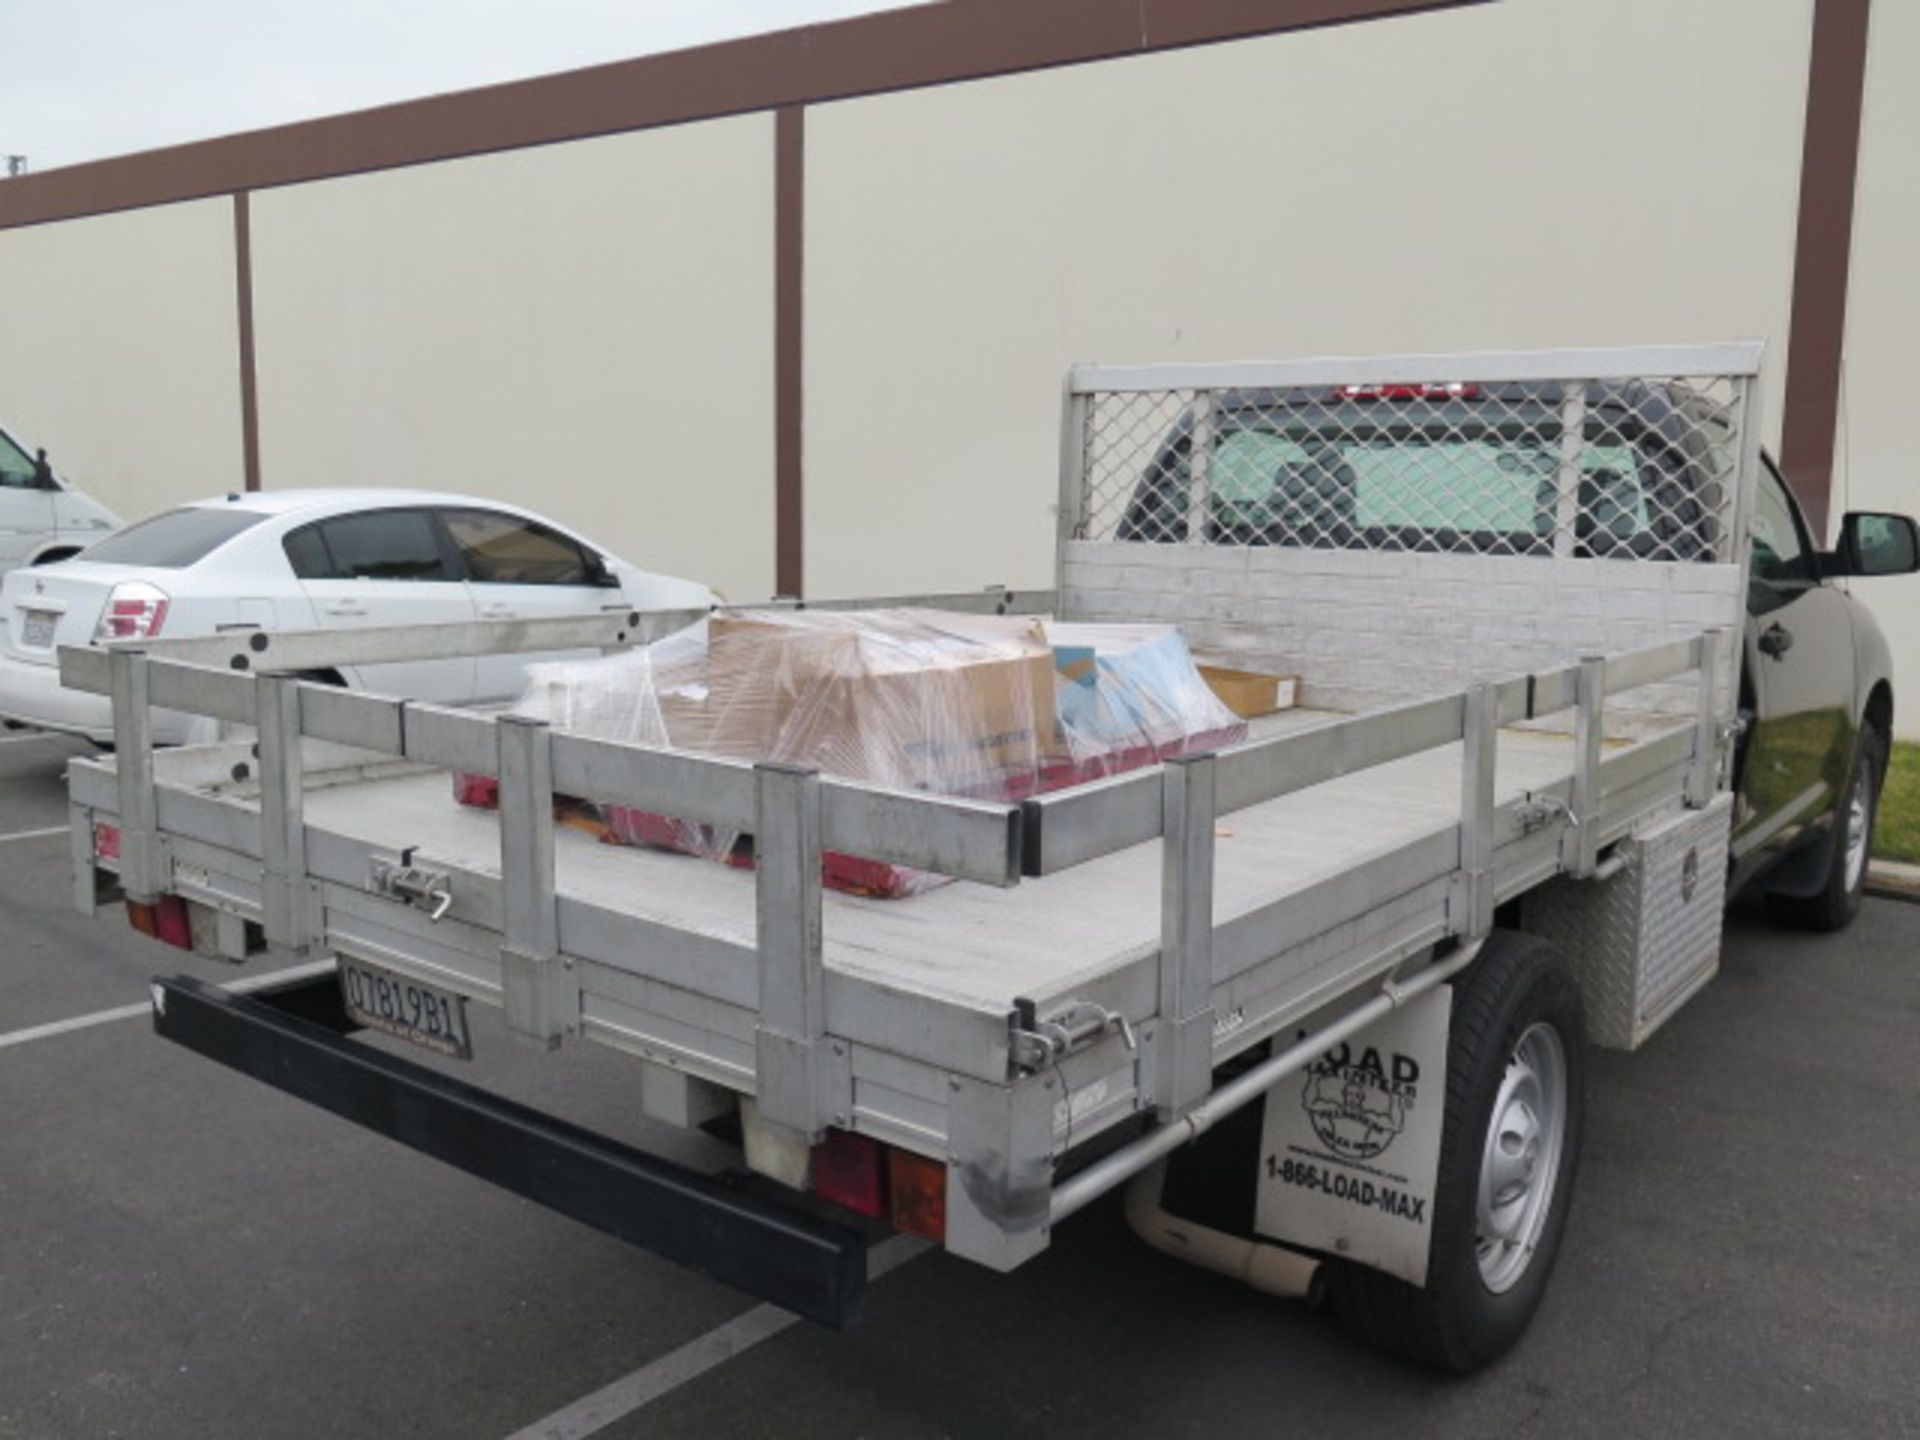 2011 Toyota Tundra 12’ Stake Bed Truck Lisc# 07819B1 w/ Gas Engine, Automatic Trans, SOLD AS IS - Image 6 of 24